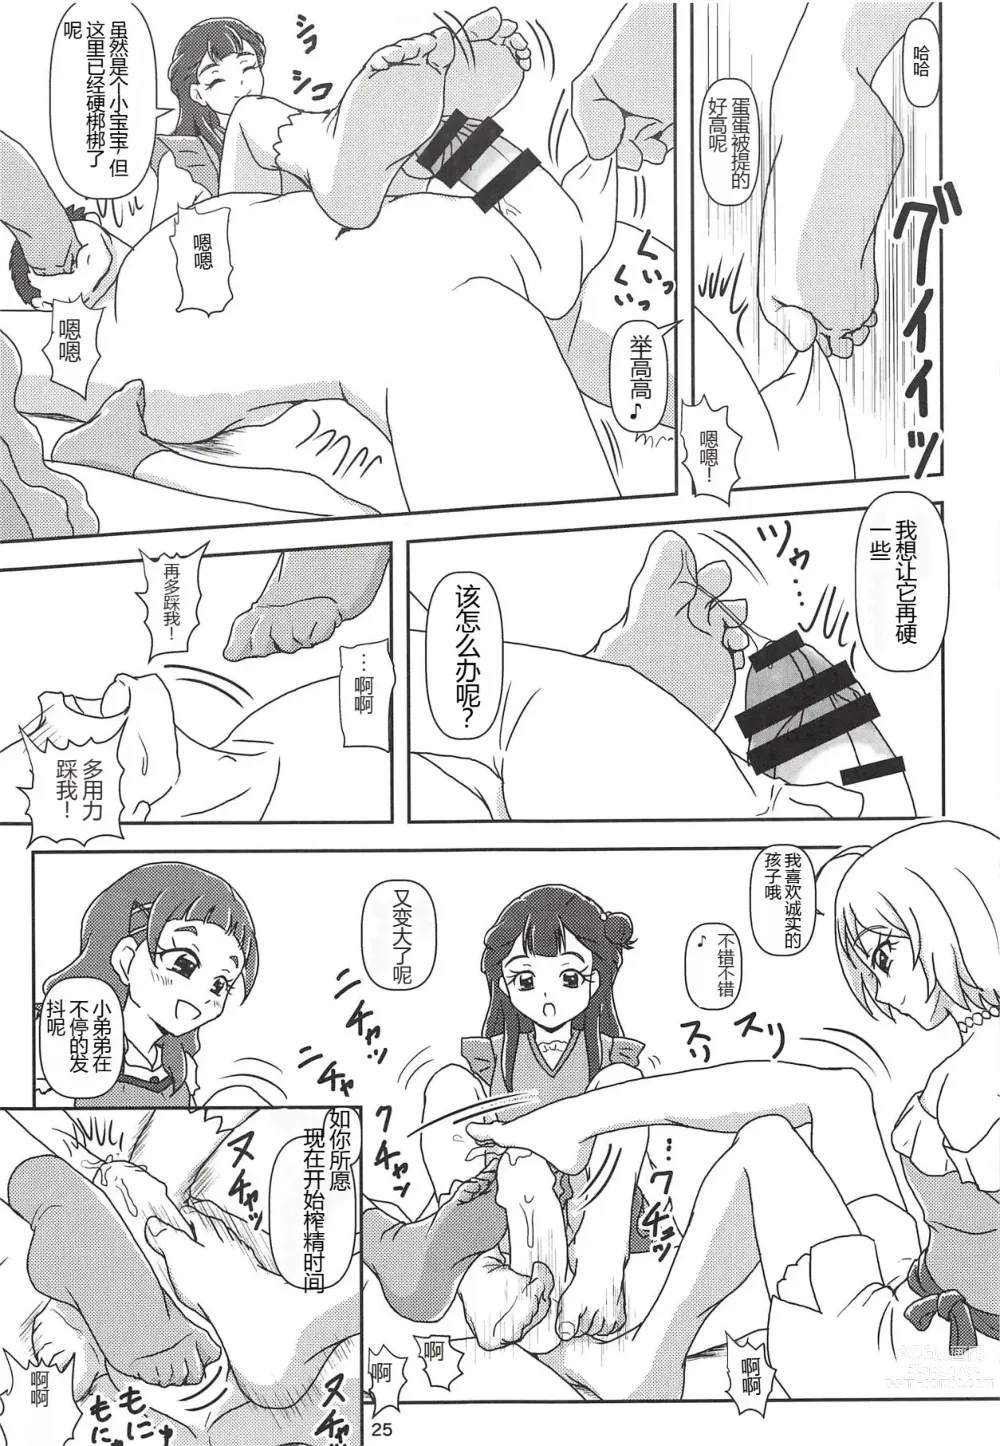 Page 24 of doujinshi Hugtto! Zuricure